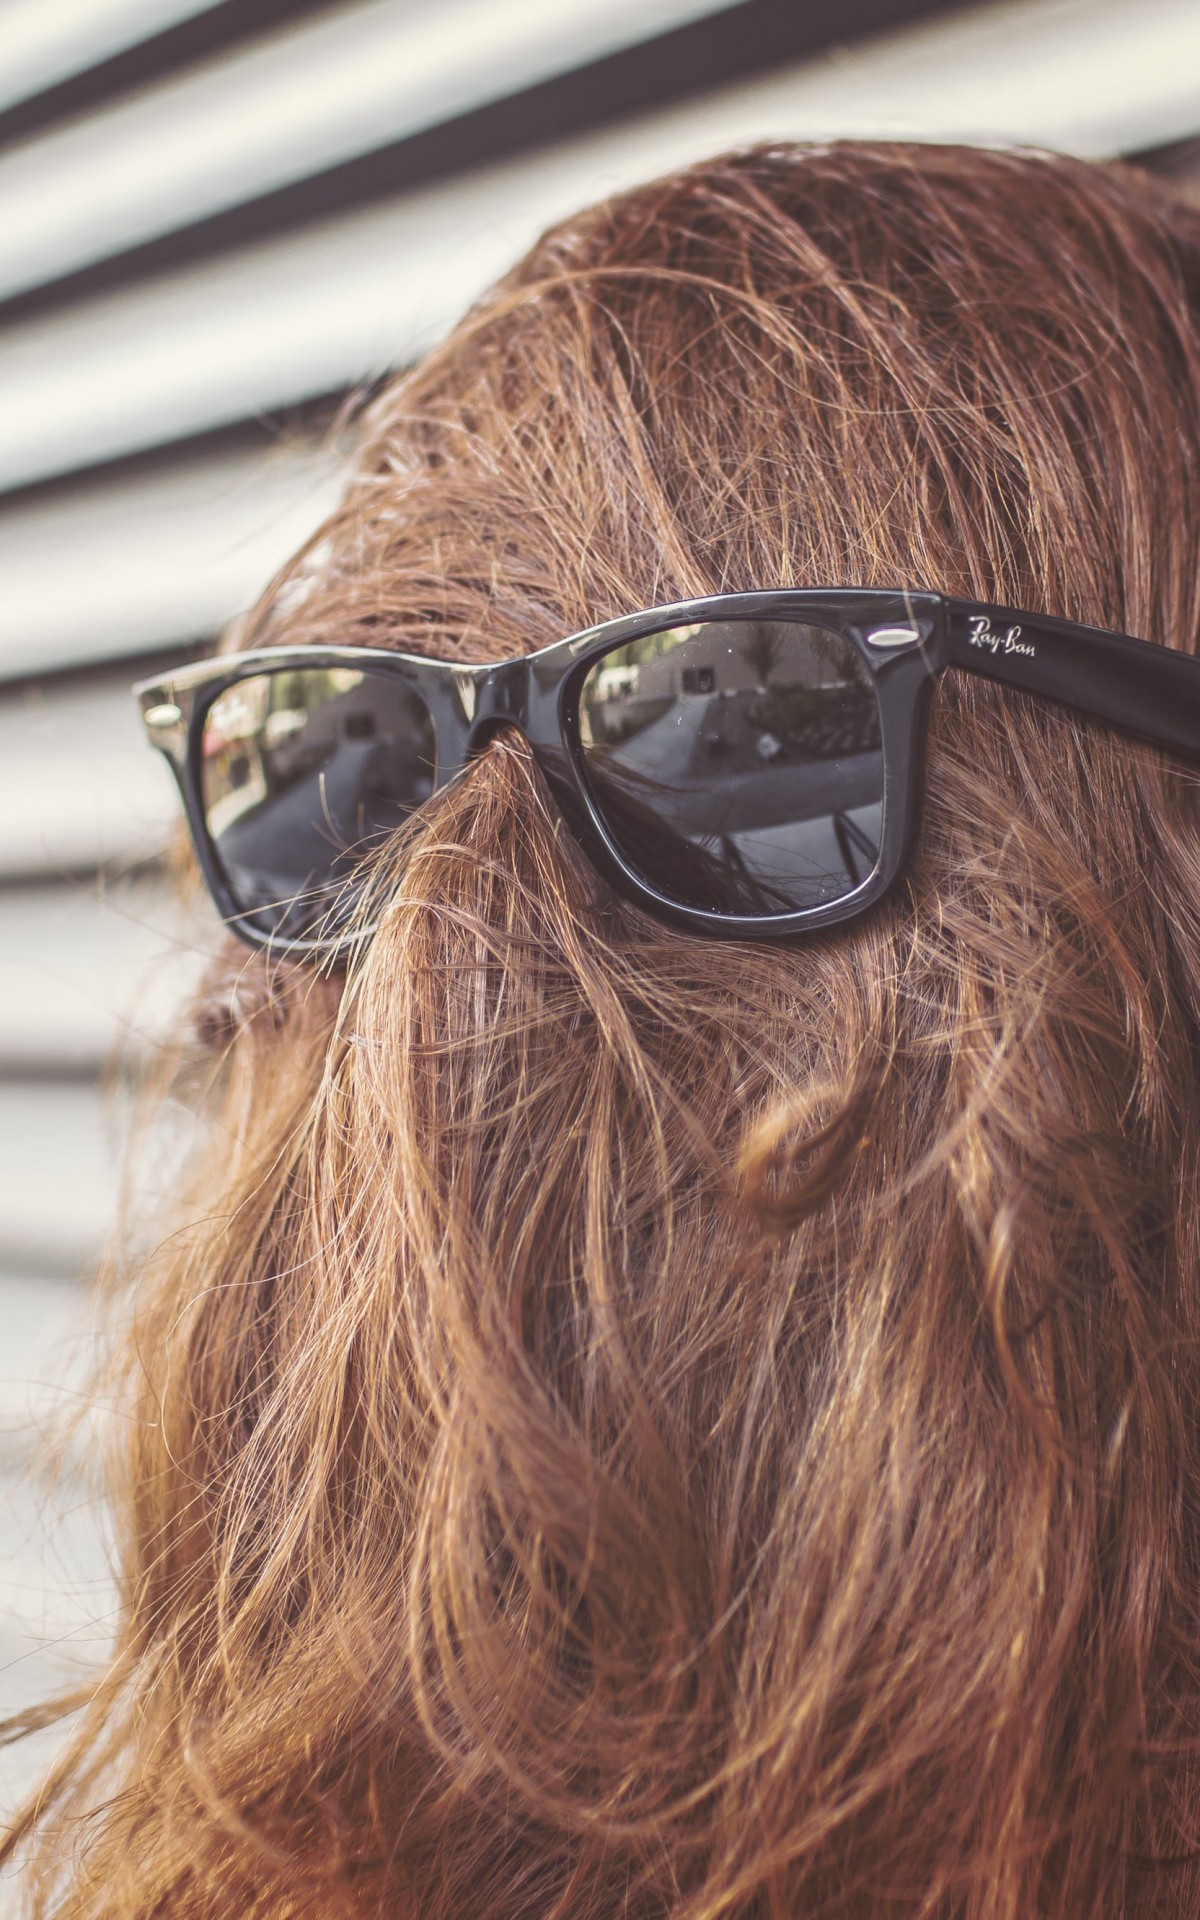 Chewbacca Girl Wallpaper for Amazon Kindle Fire HDX